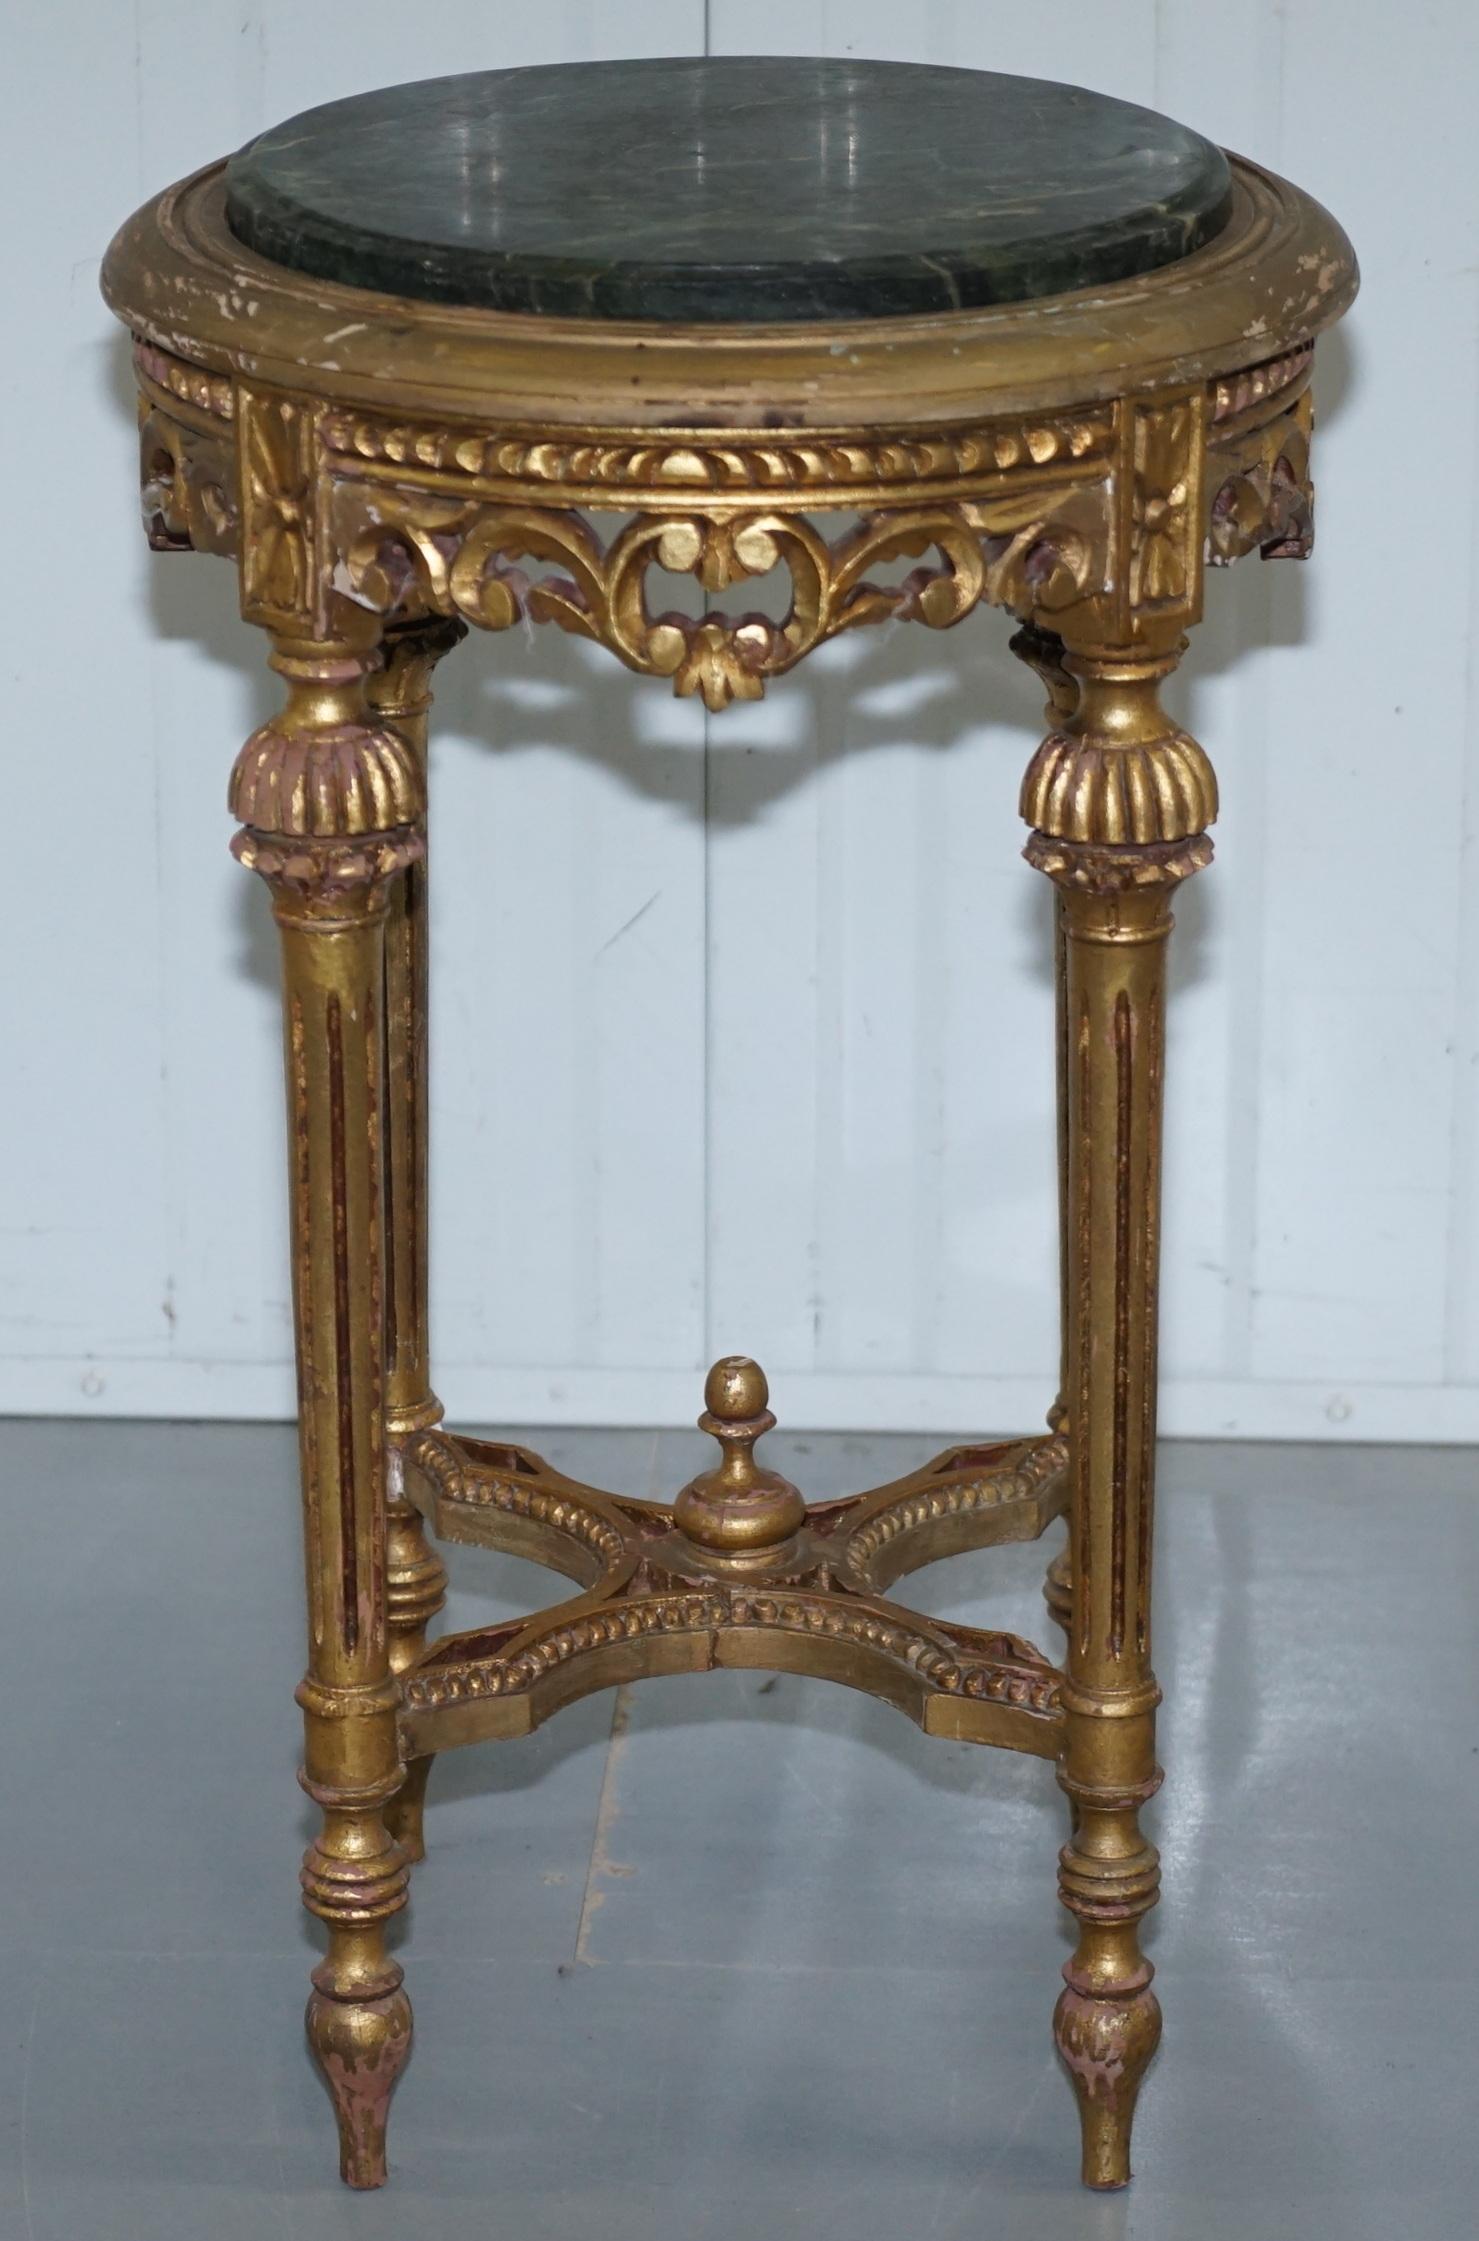 We are delighted to offer for sale this stunning handmade antique French Rococo marble topped giltwood jardinière stand

A well made period piece with original giltwood distressed finish, the top is solid marble, hand-carved with a nice